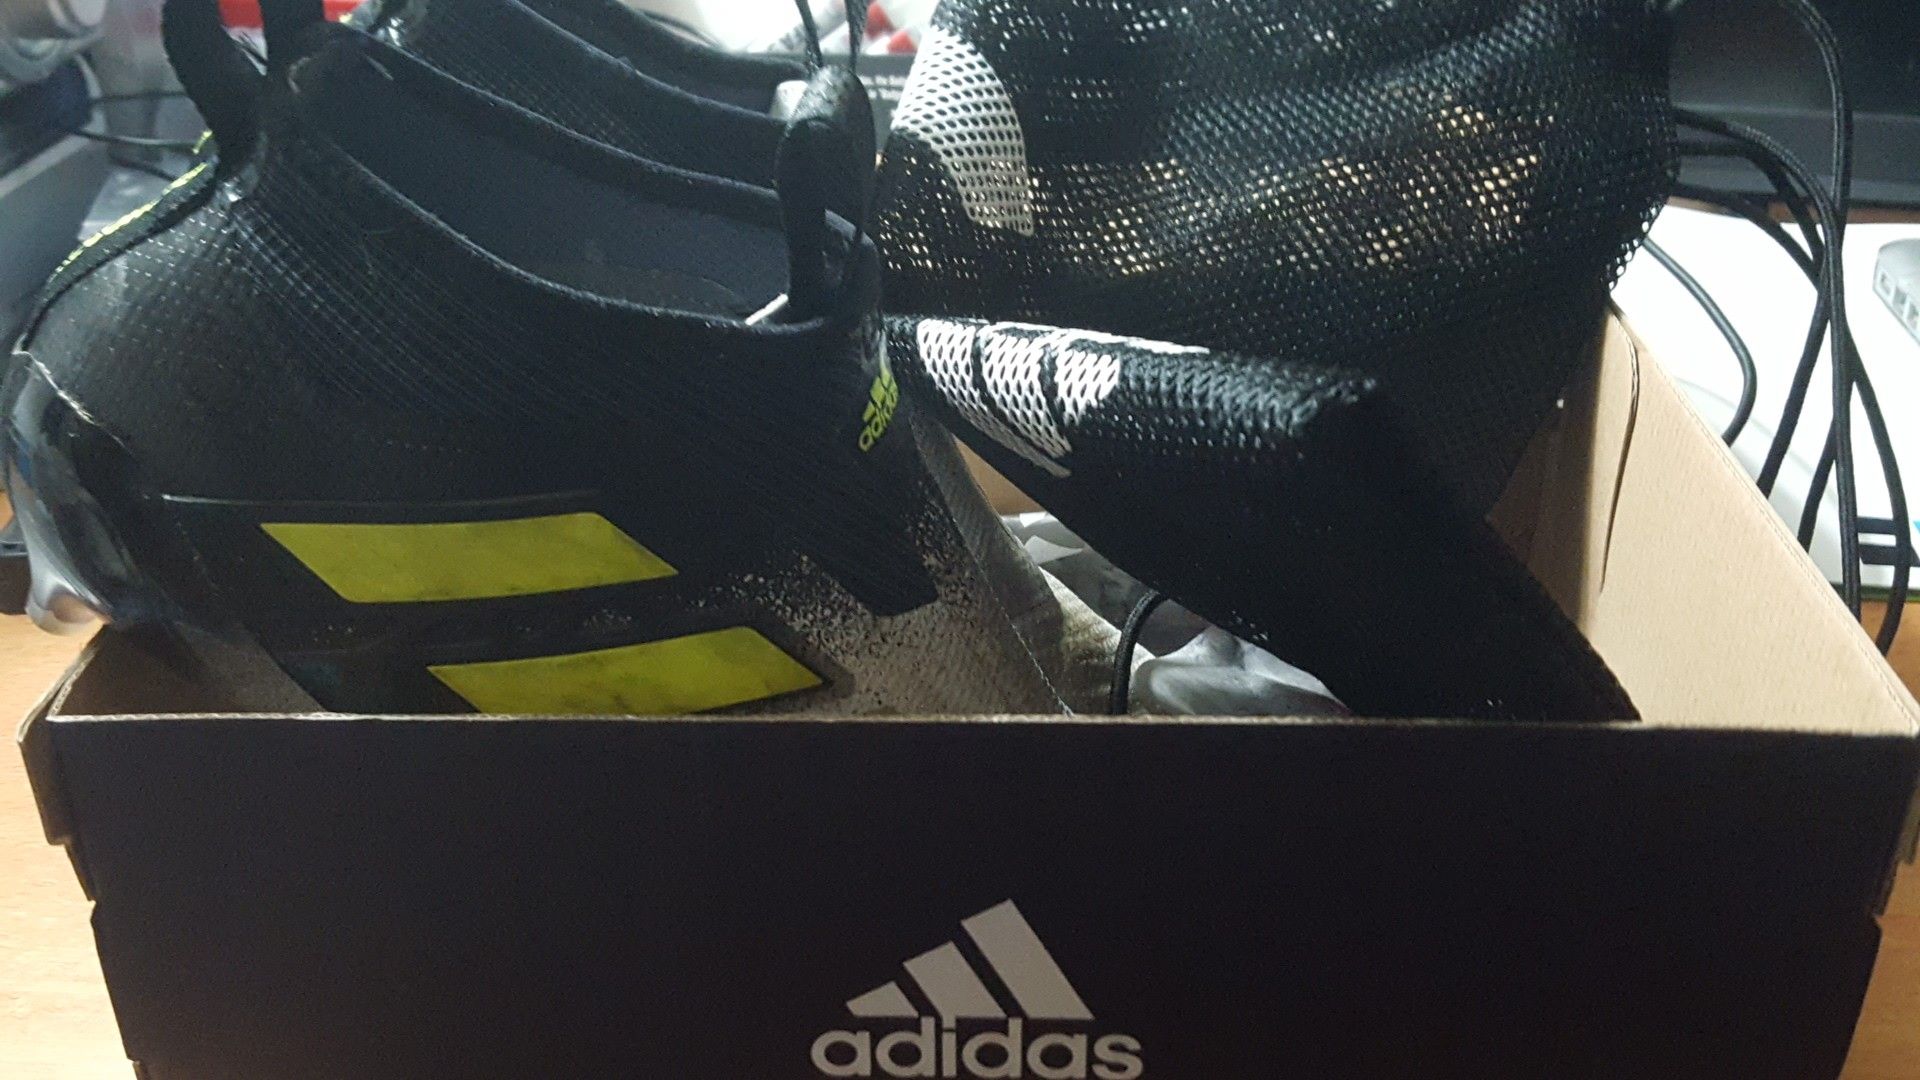 Adidas Ace 17+ Purecontrol Soccer Cleats